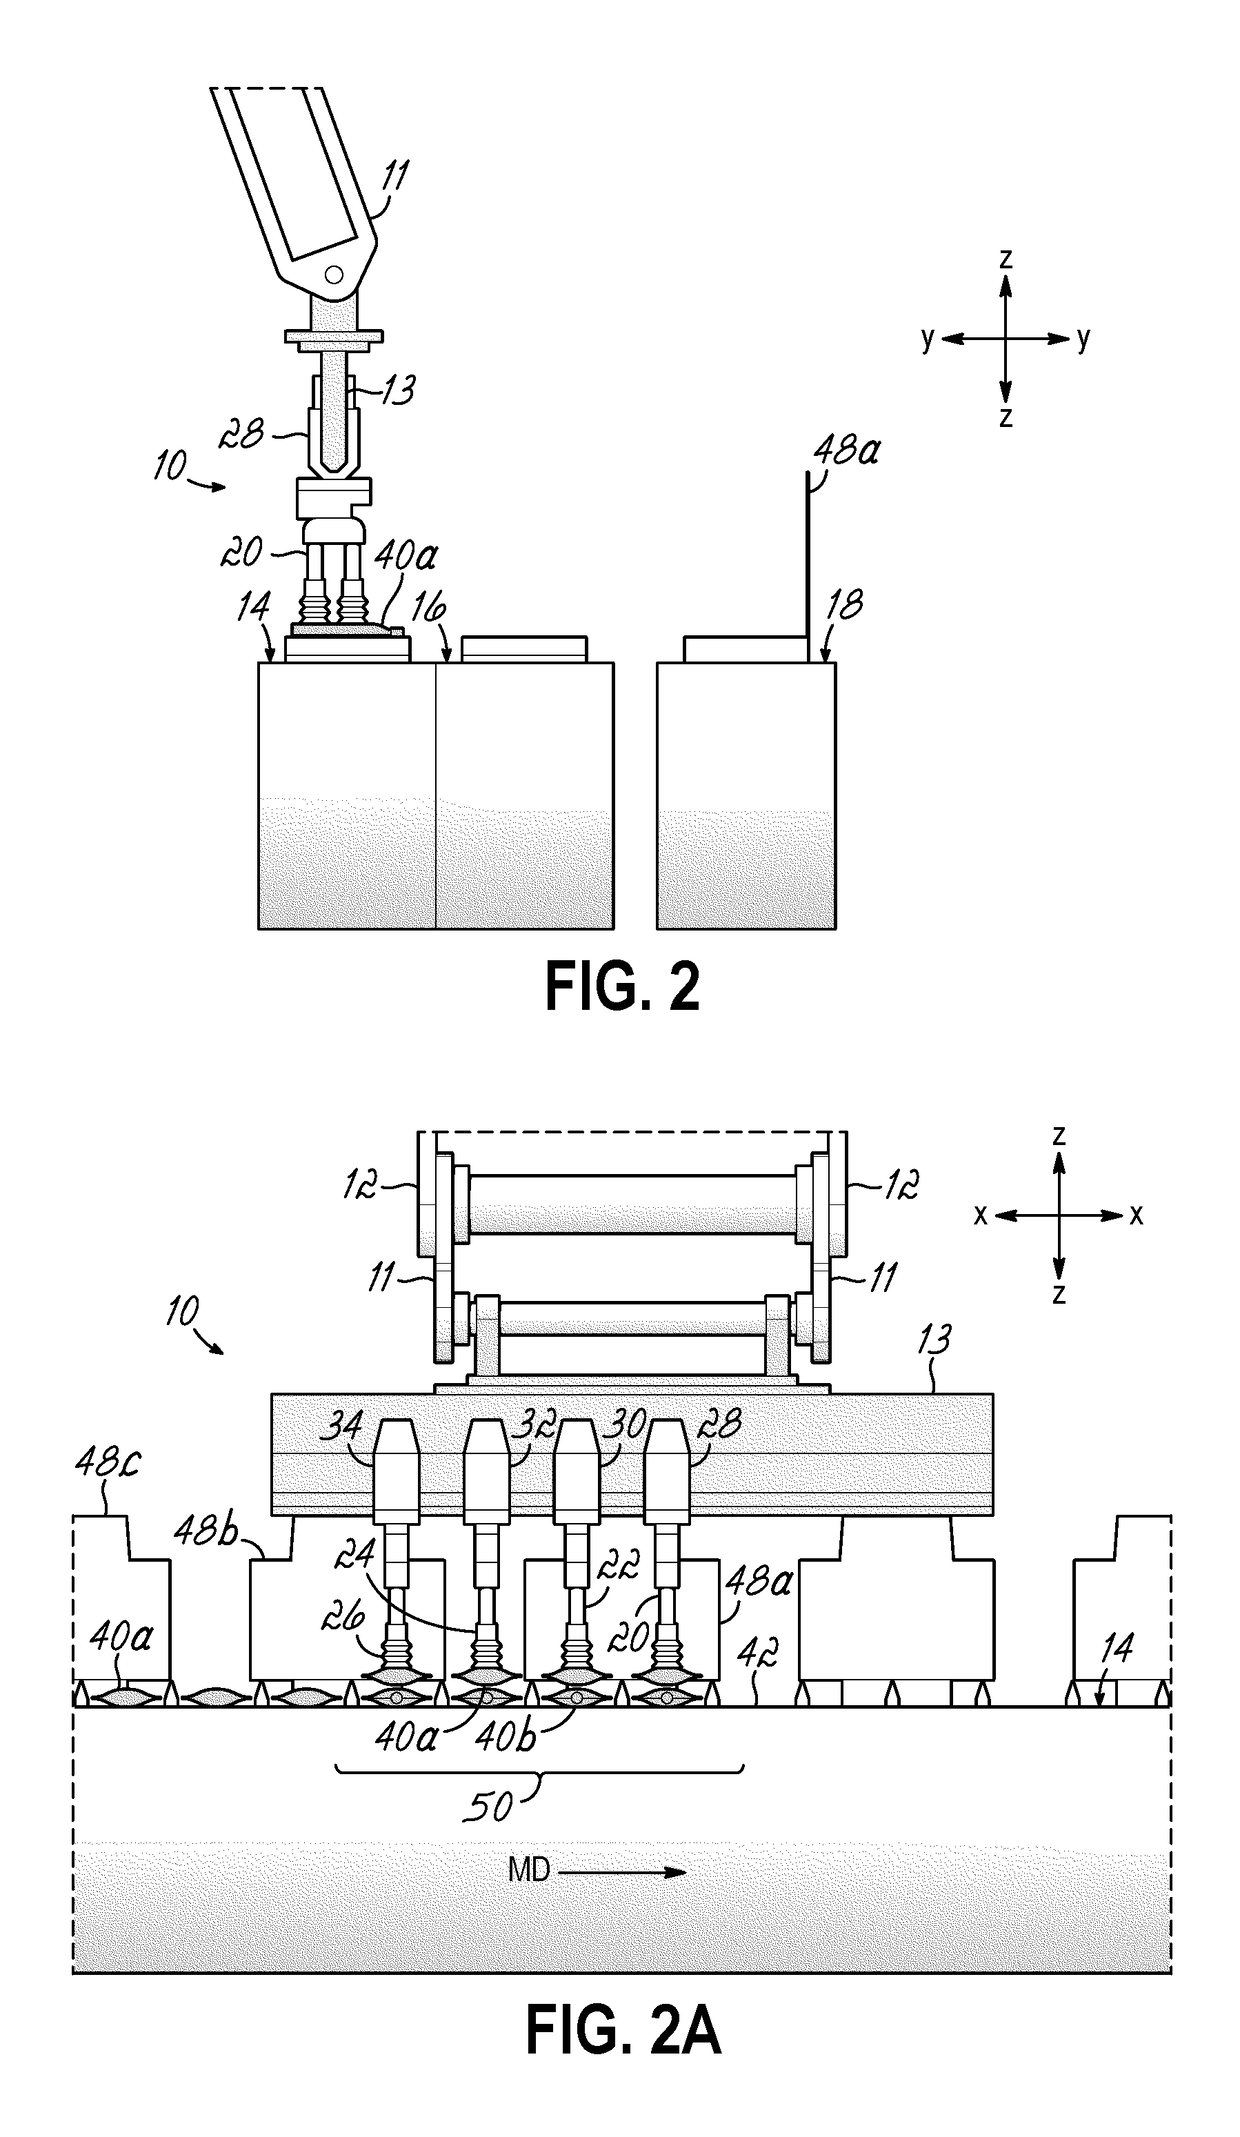 Apparatus and methods for transferring continuously moving articles to continuously moving packages with intervening article grouping and group pitch adjustment